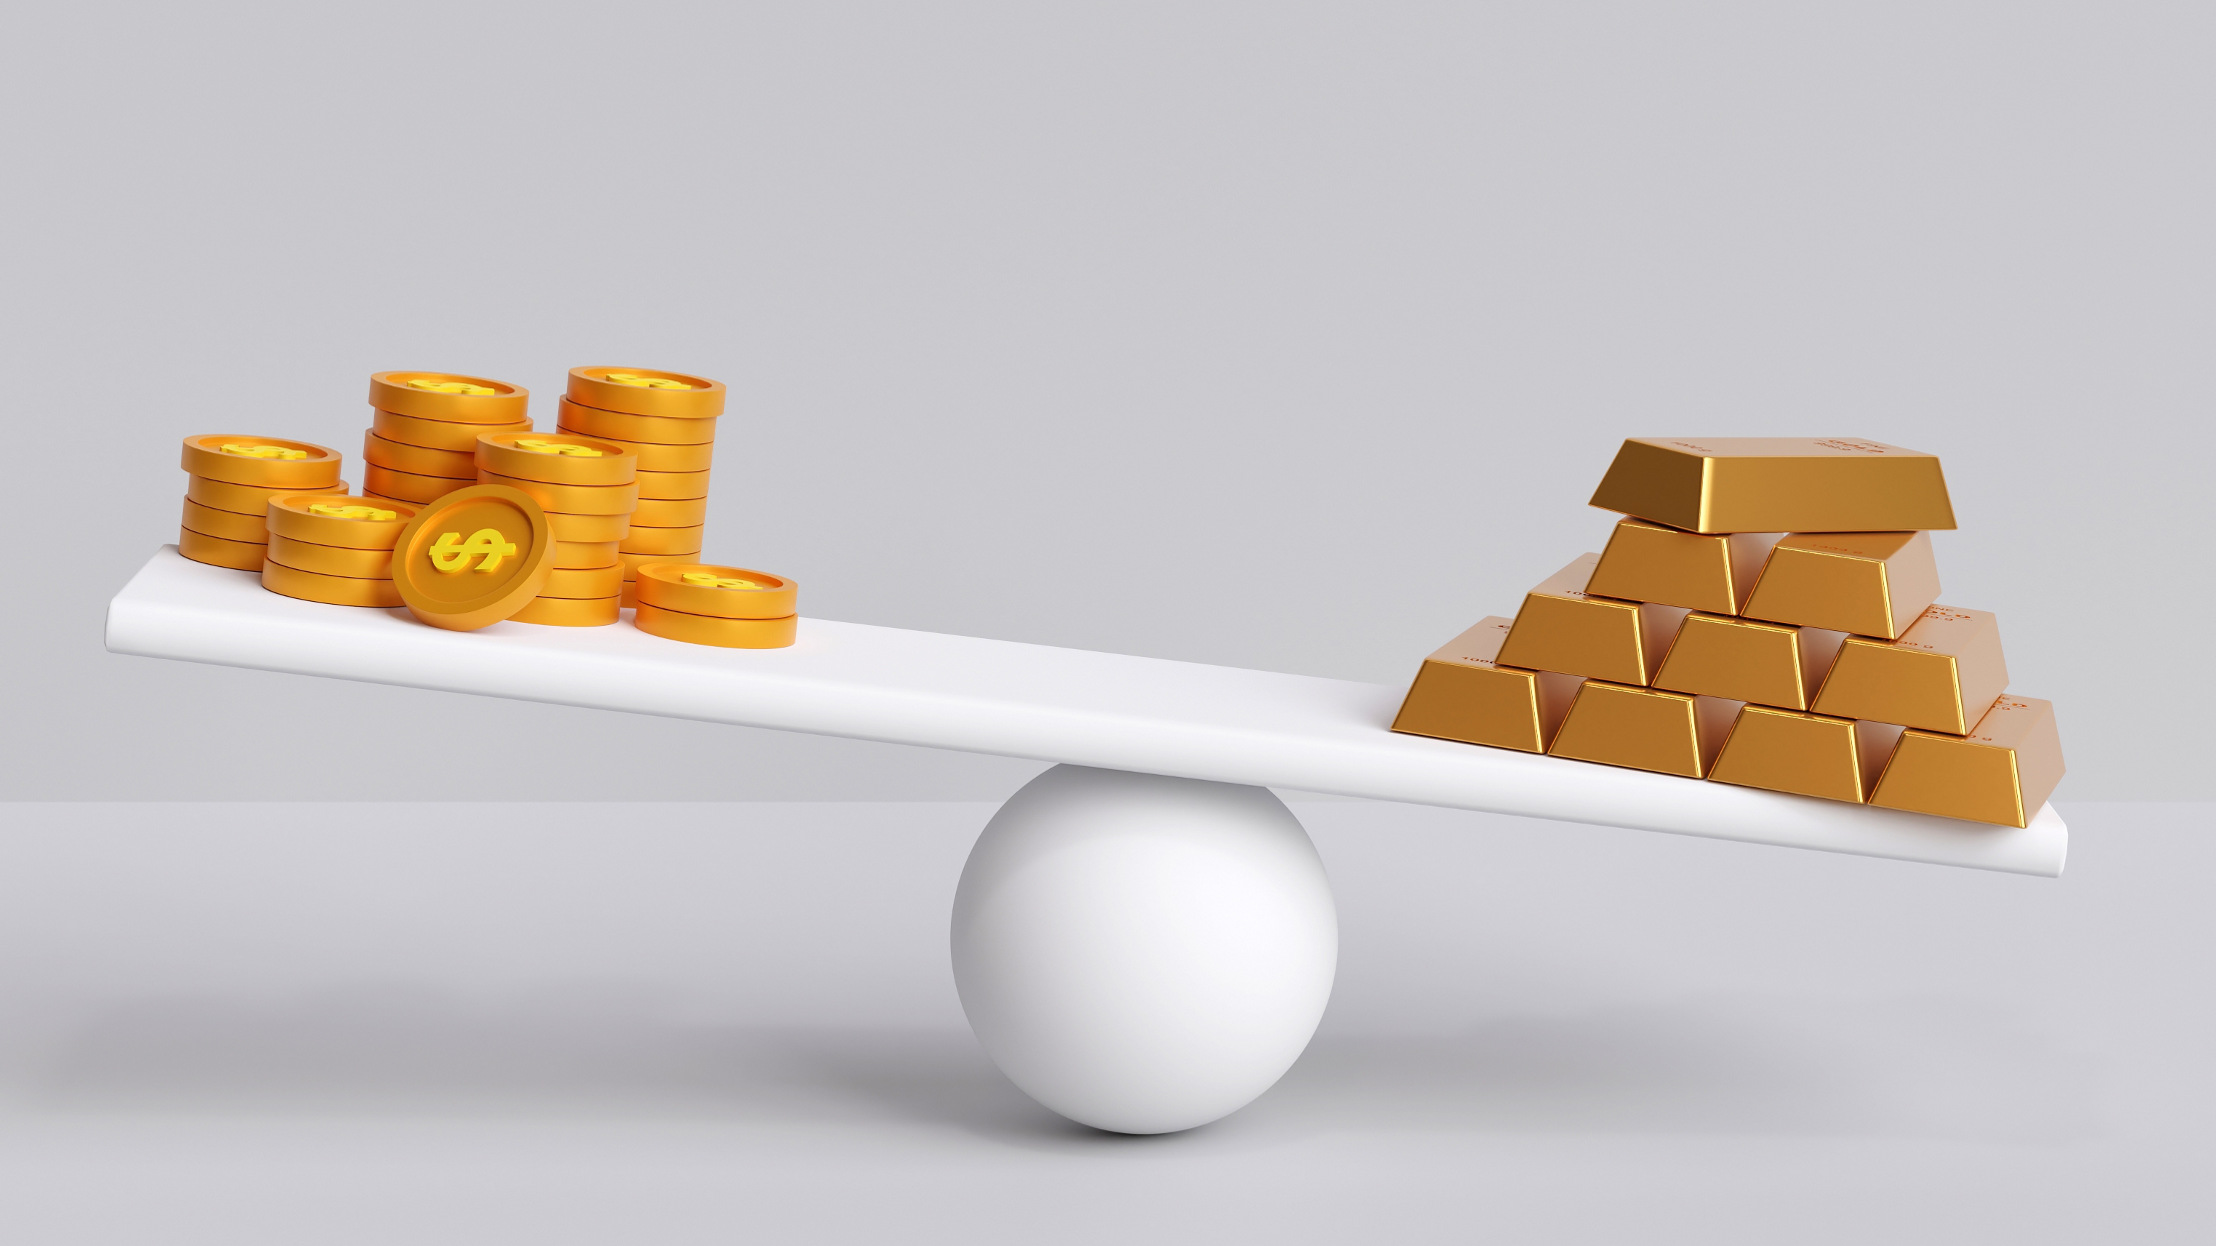 coins and gold bars on separate sides of a seesaw